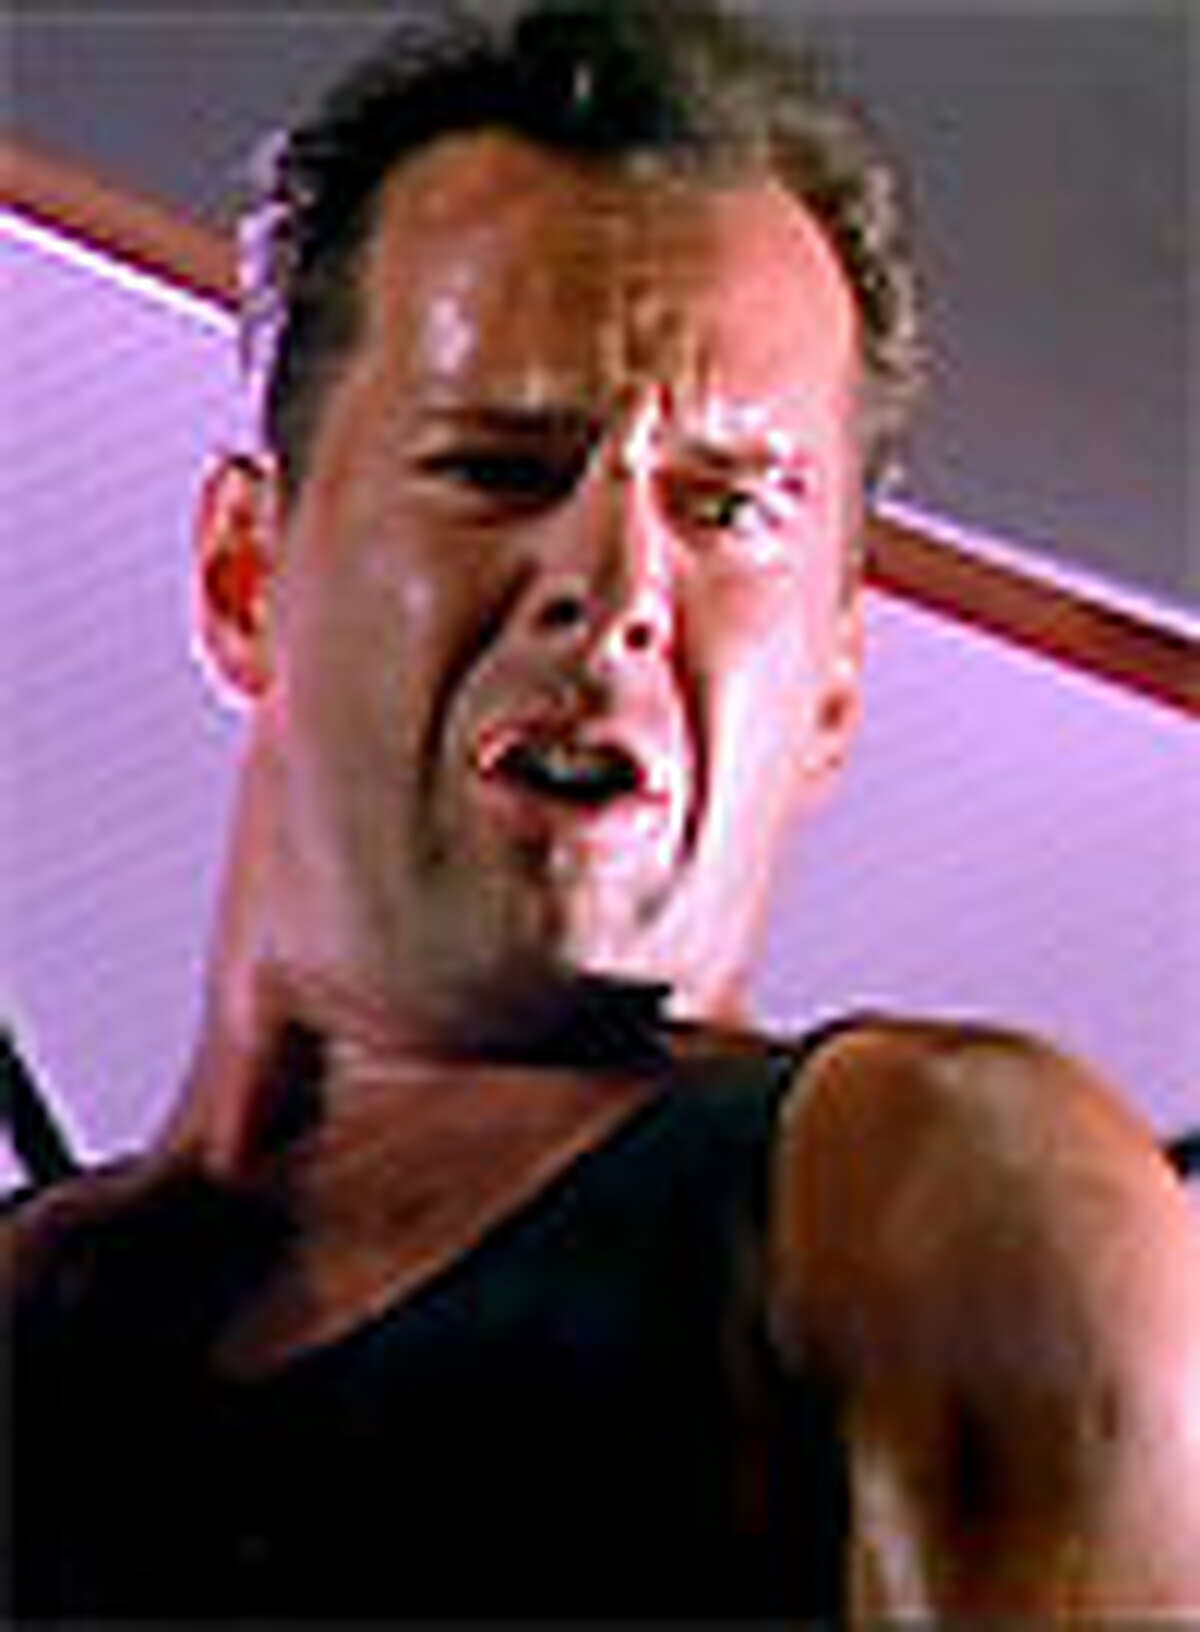 Who can forget the heart pumping, edge of your seat thrill of the original Die Hard? It starred Bruce Willis - who still had hair- as John MCClane, a NYPD cop, who takes on German terrorist Hans Gruber. Gruber and his evil crew had taken McClane's wife Holly Gennaro and several others hostage during a Christmas party at the Nakatomi Plaza in Los Angeles.Willis in "Die Hard"